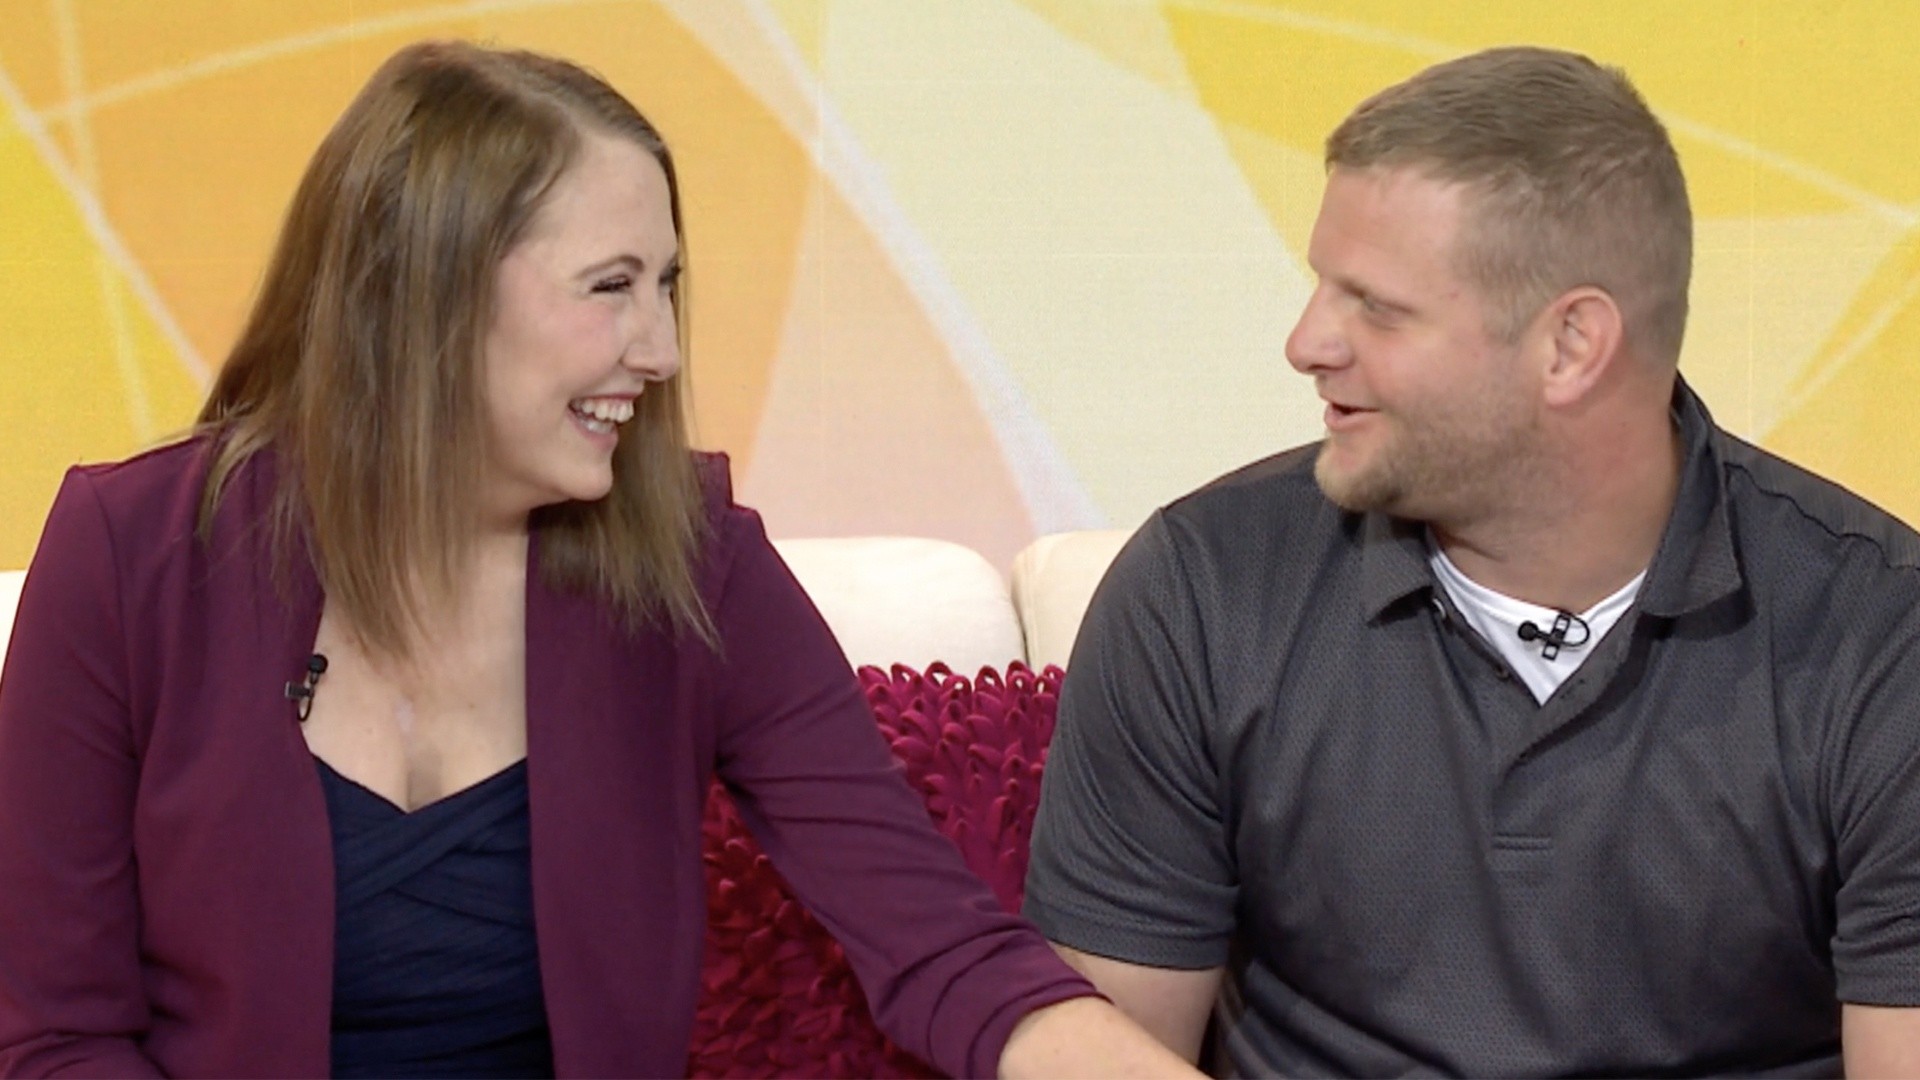 Meet the woman found love through organ donor's brother